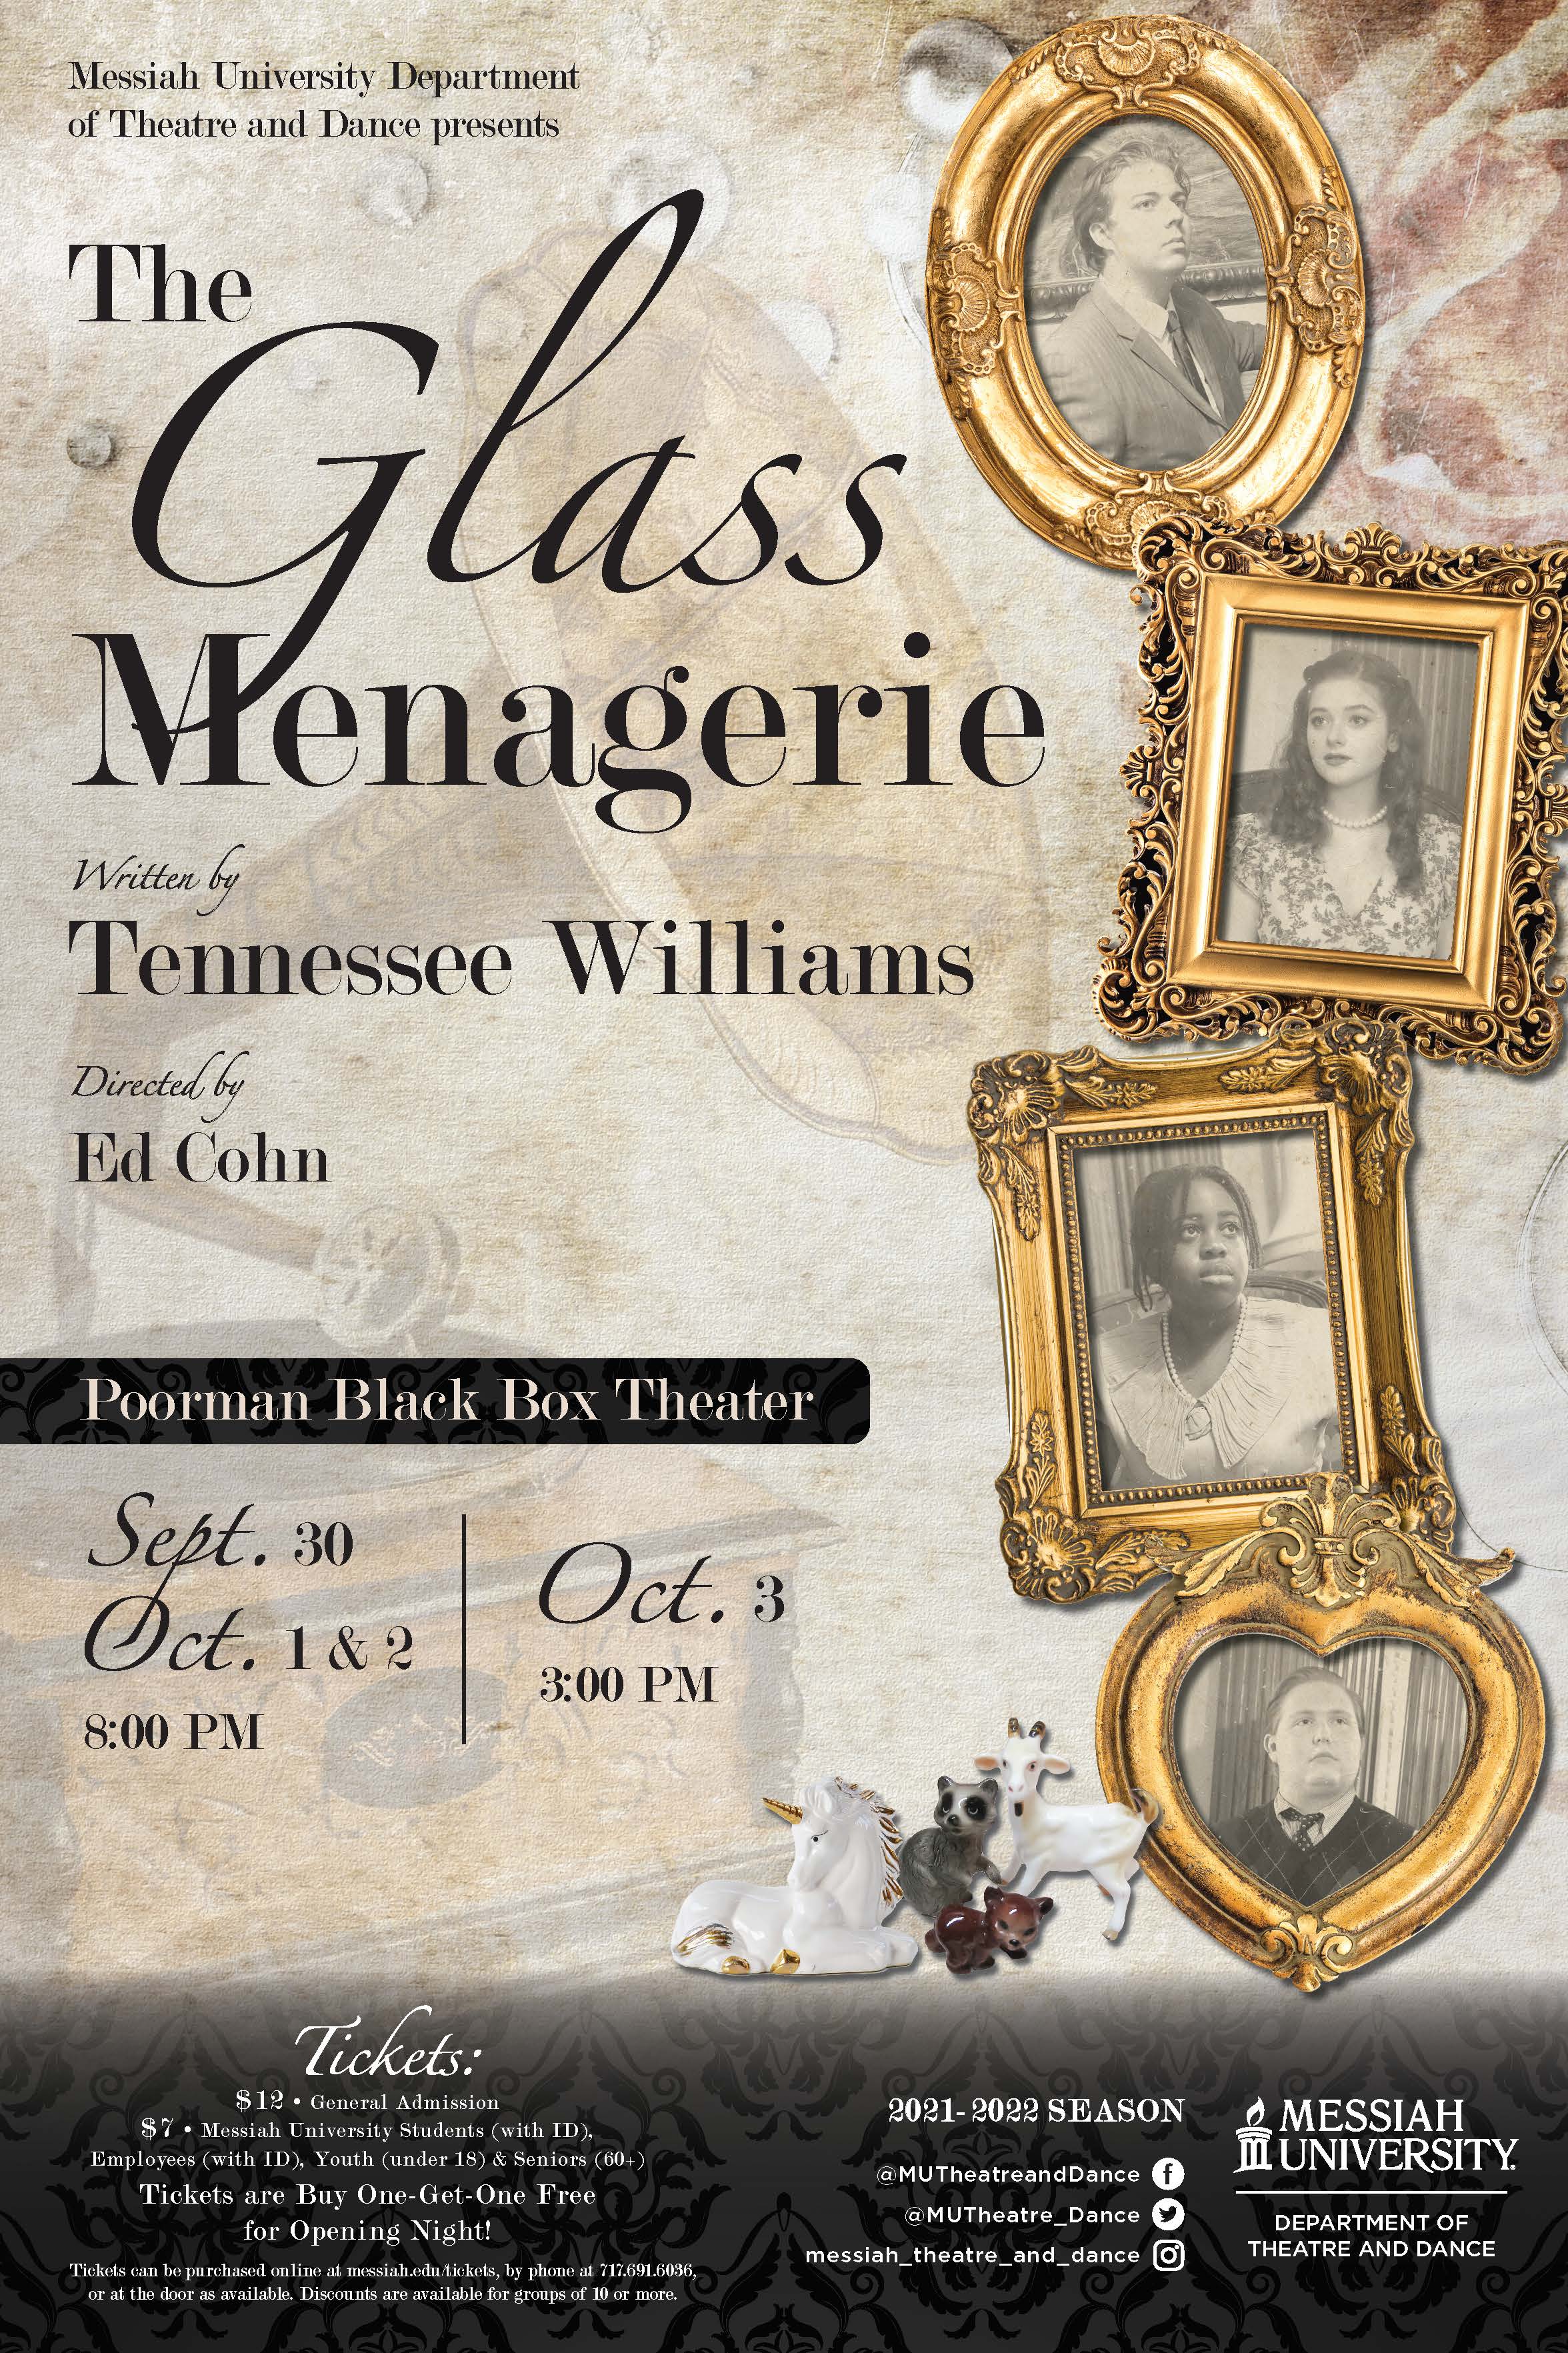 The glass menagerie marquee